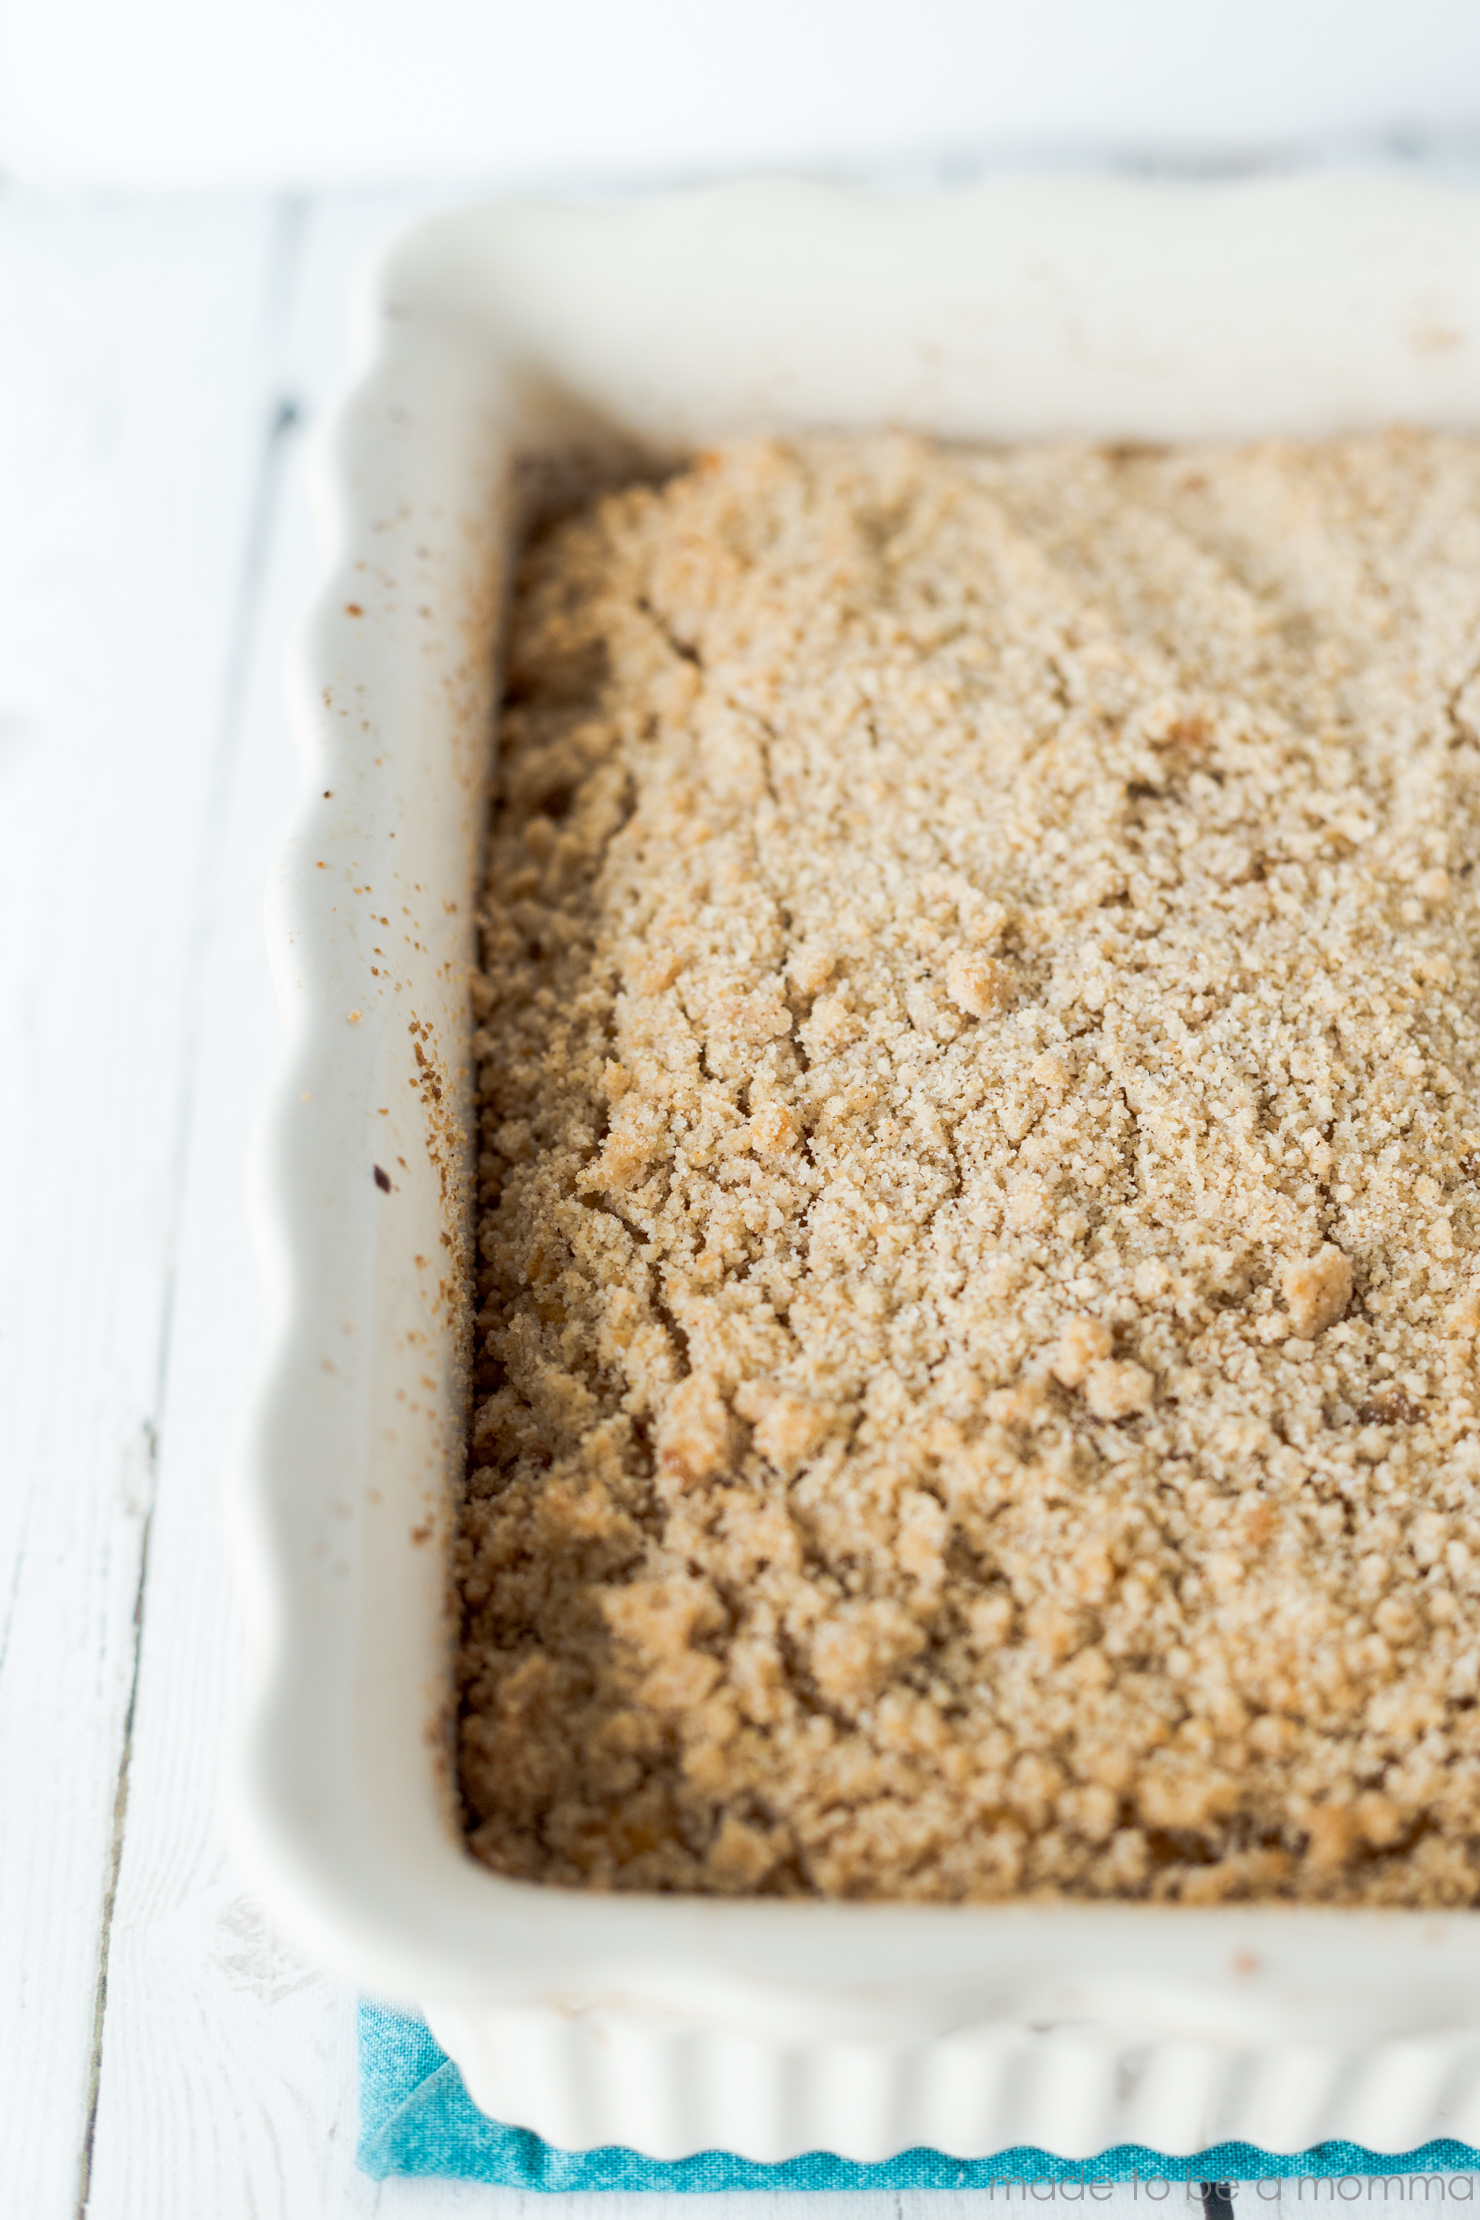 This Cake Mix Pumpkin Crumb Cake is full of flavor and stays moist for days! 